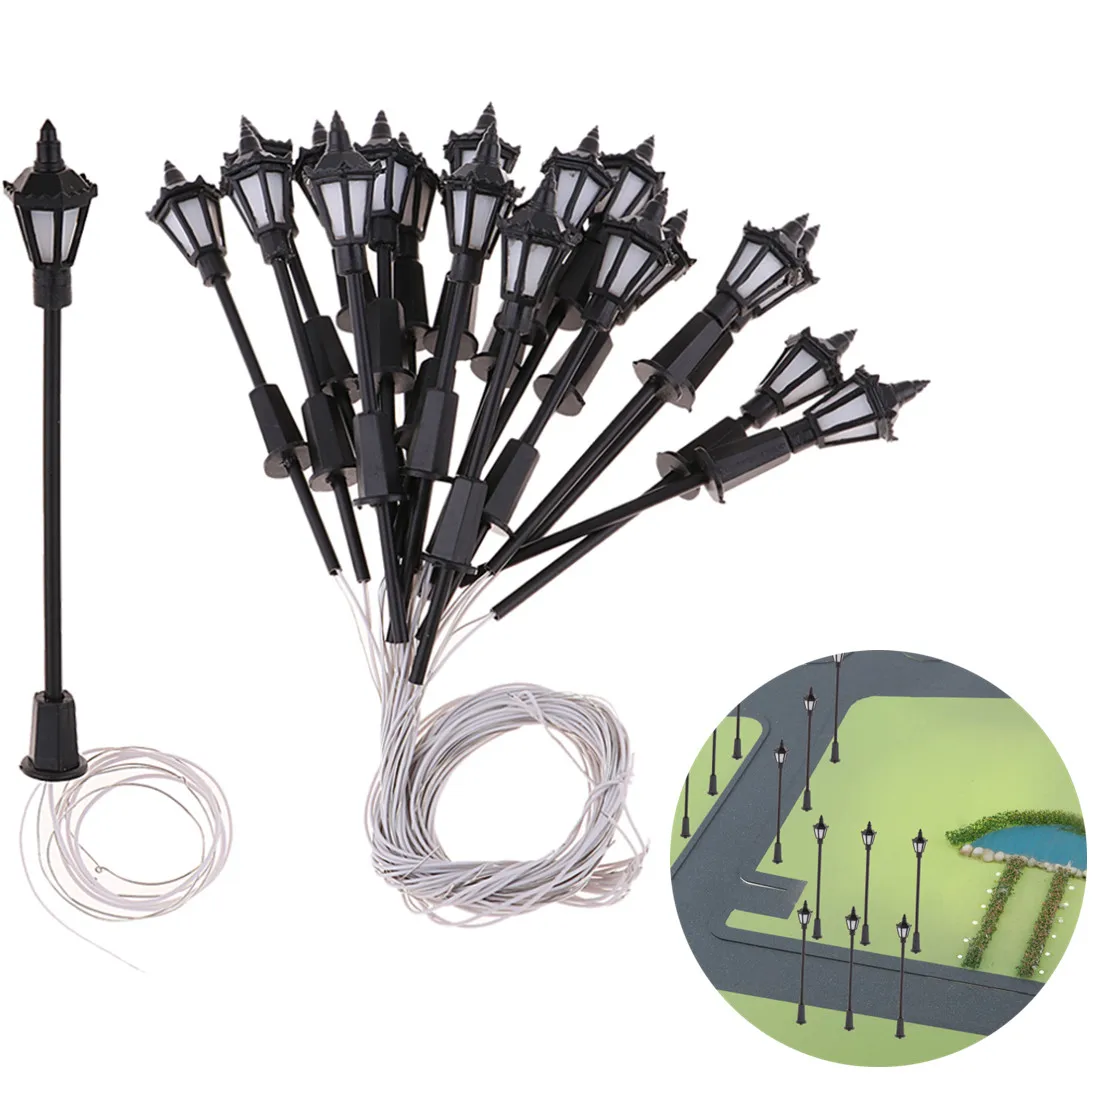 

20PC 7cm Model Railway Led Lamppost Lamps Wall Lights 1:100 Scale 3V White Miniature LED Street Lights 1:100 H0 Scale Lamp Post